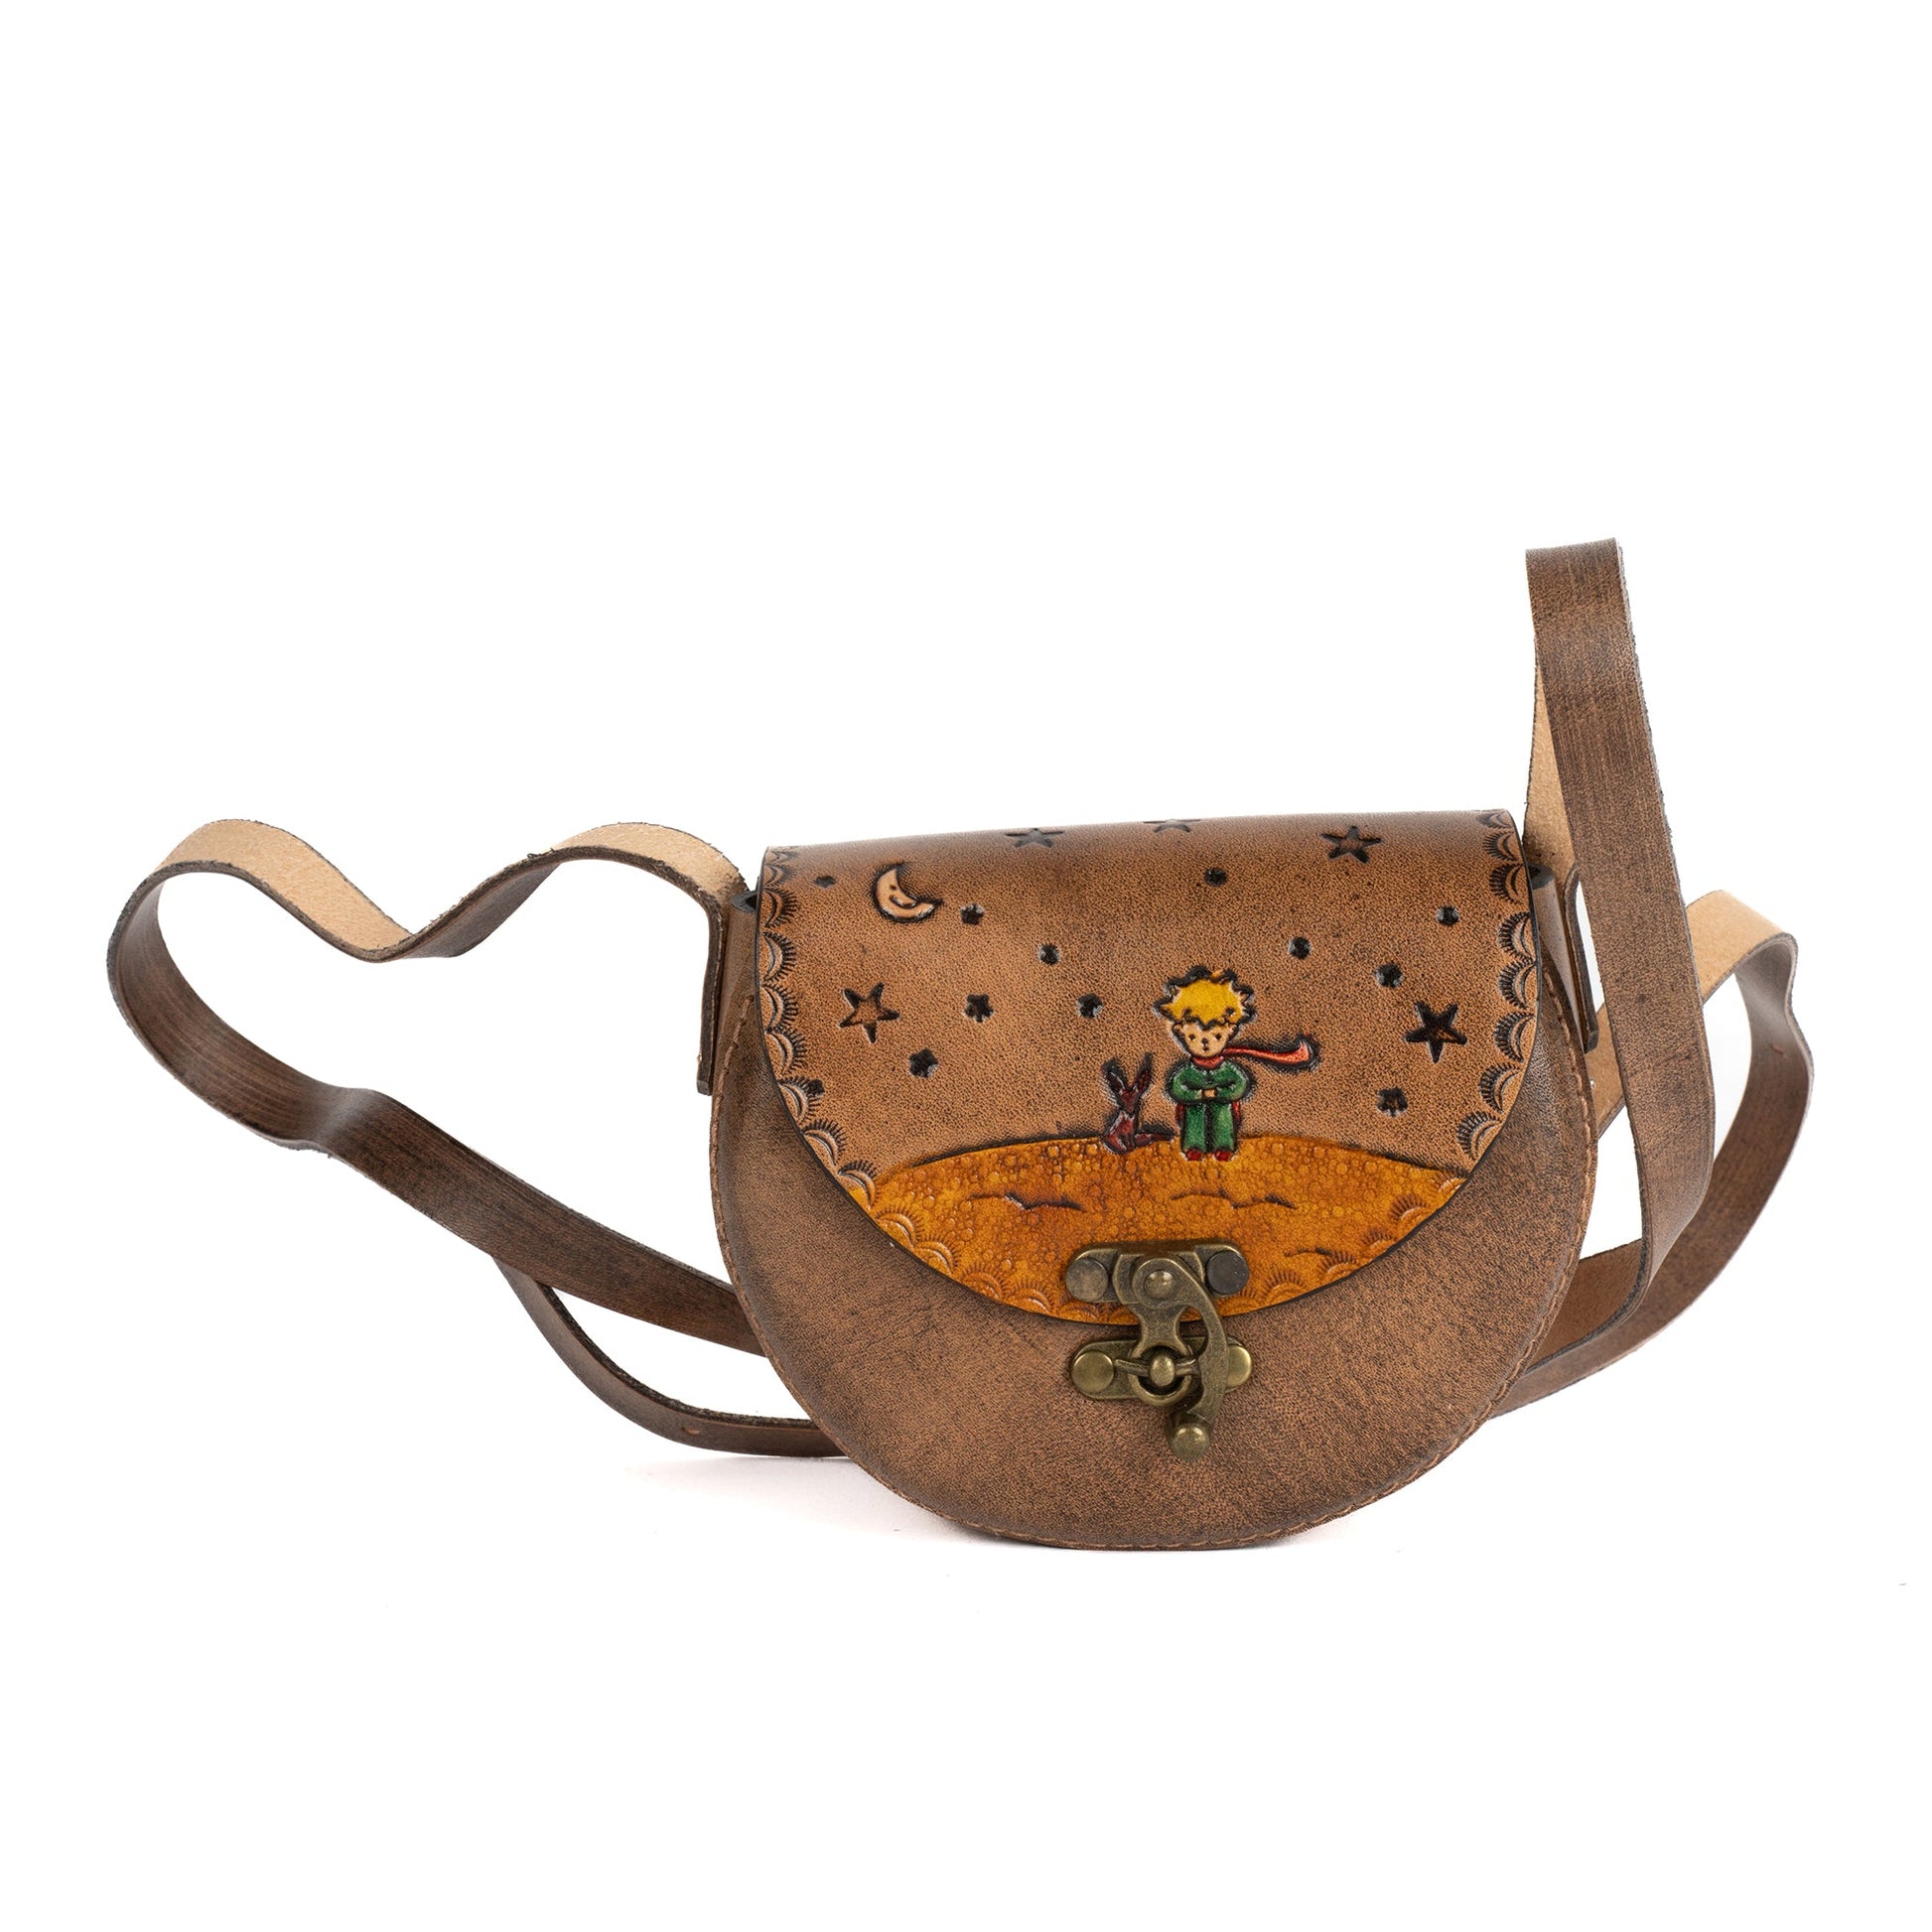 Little Prince Tan Leather Carved & Crafted Hand Bag - Handbags Zengoda Shop online from Artisan Brands